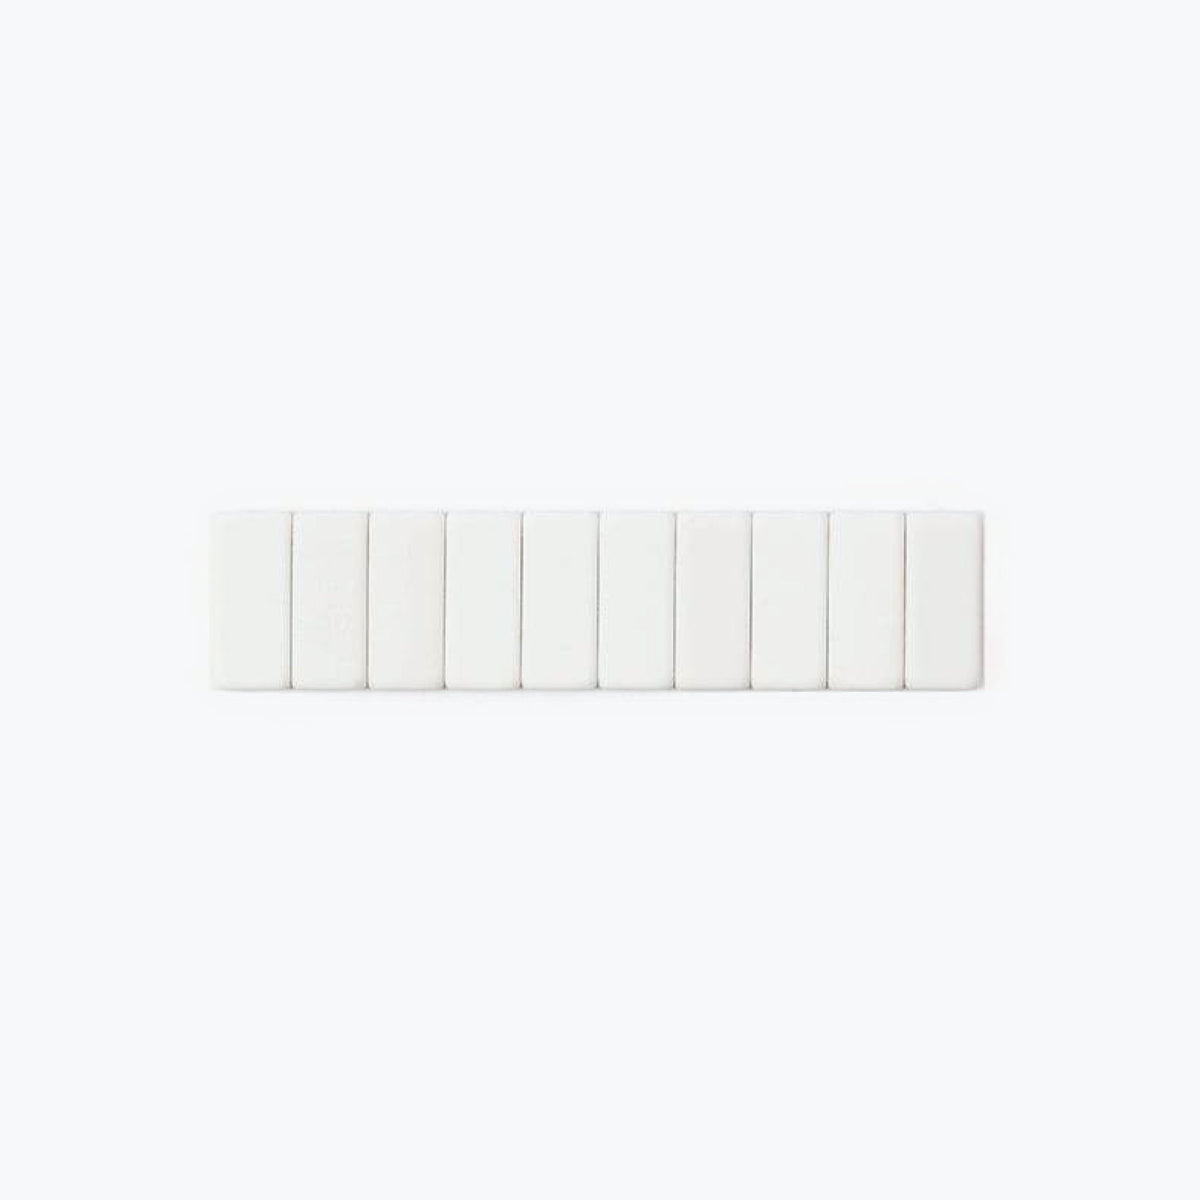 Palomino Blackwing - Replacement Erasers - 10 Pack - White